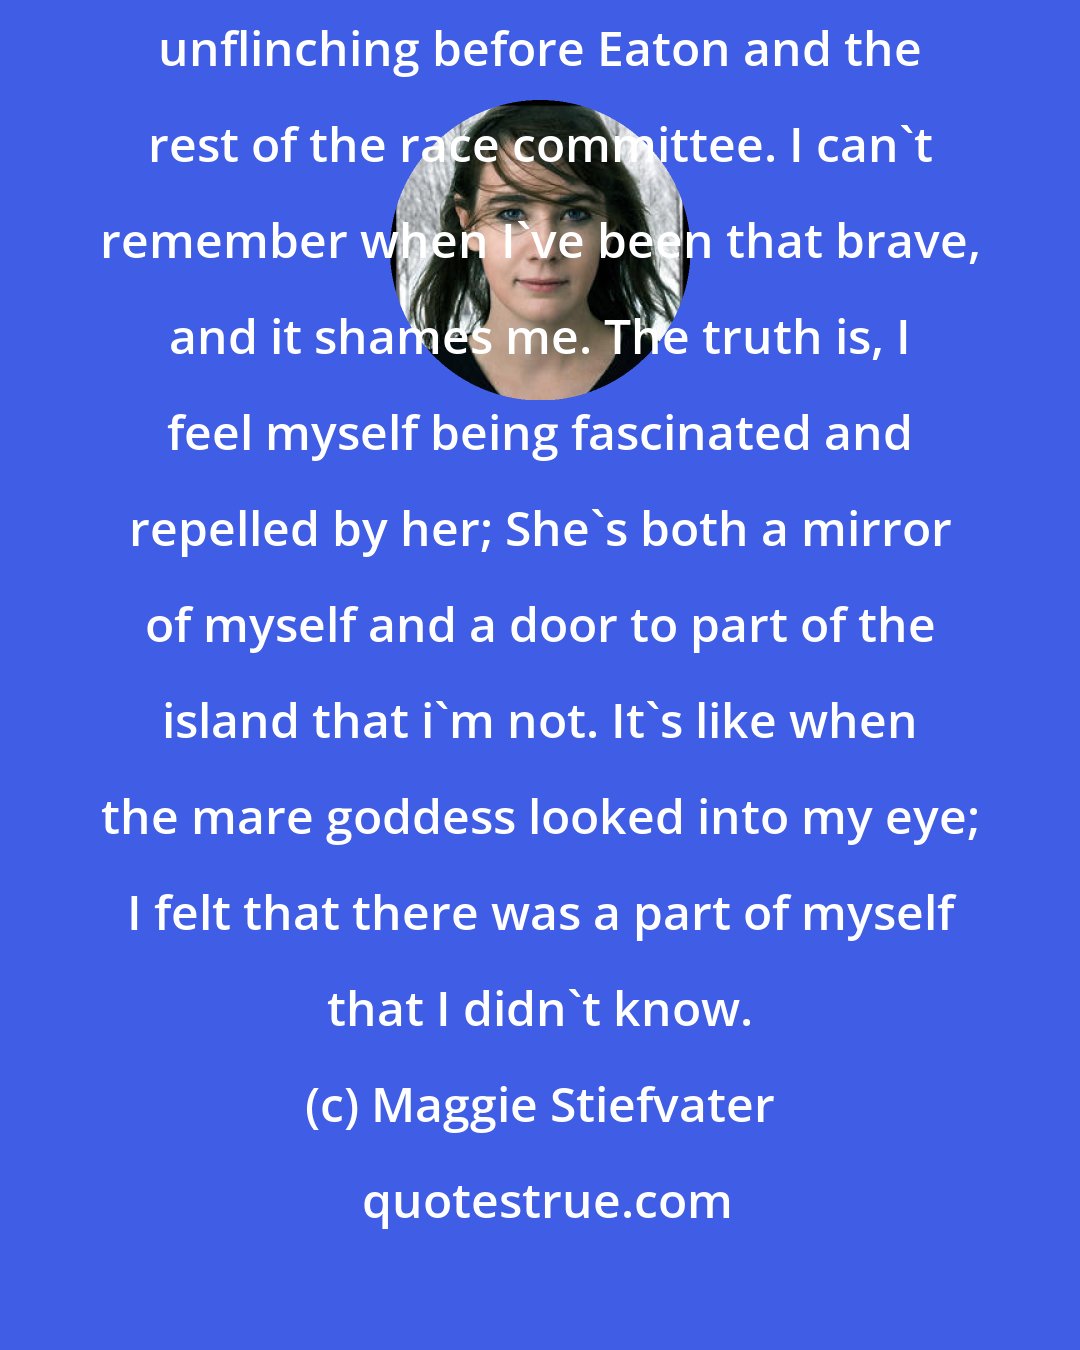 Maggie Stiefvater: I can see her clearly, standing on the rock beside Peg Gratton, unflinching before Eaton and the rest of the race committee. I can't remember when I've been that brave, and it shames me. The truth is, I feel myself being fascinated and repelled by her; She's both a mirror of myself and a door to part of the island that i'm not. It's like when the mare goddess looked into my eye; I felt that there was a part of myself that I didn't know.